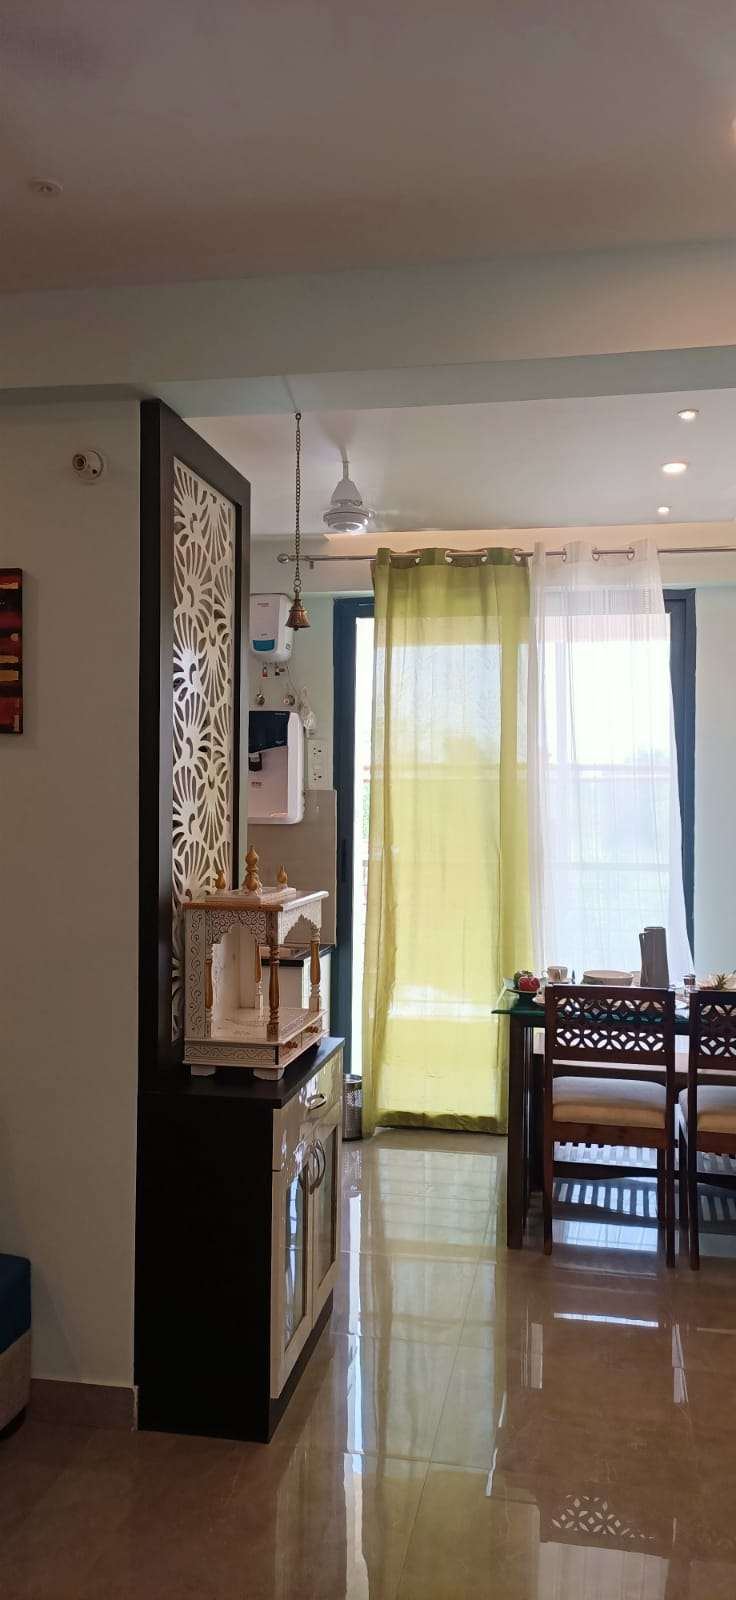 2 Bedroom 899 Sq.Ft. Apartment in Chinhat Lucknow